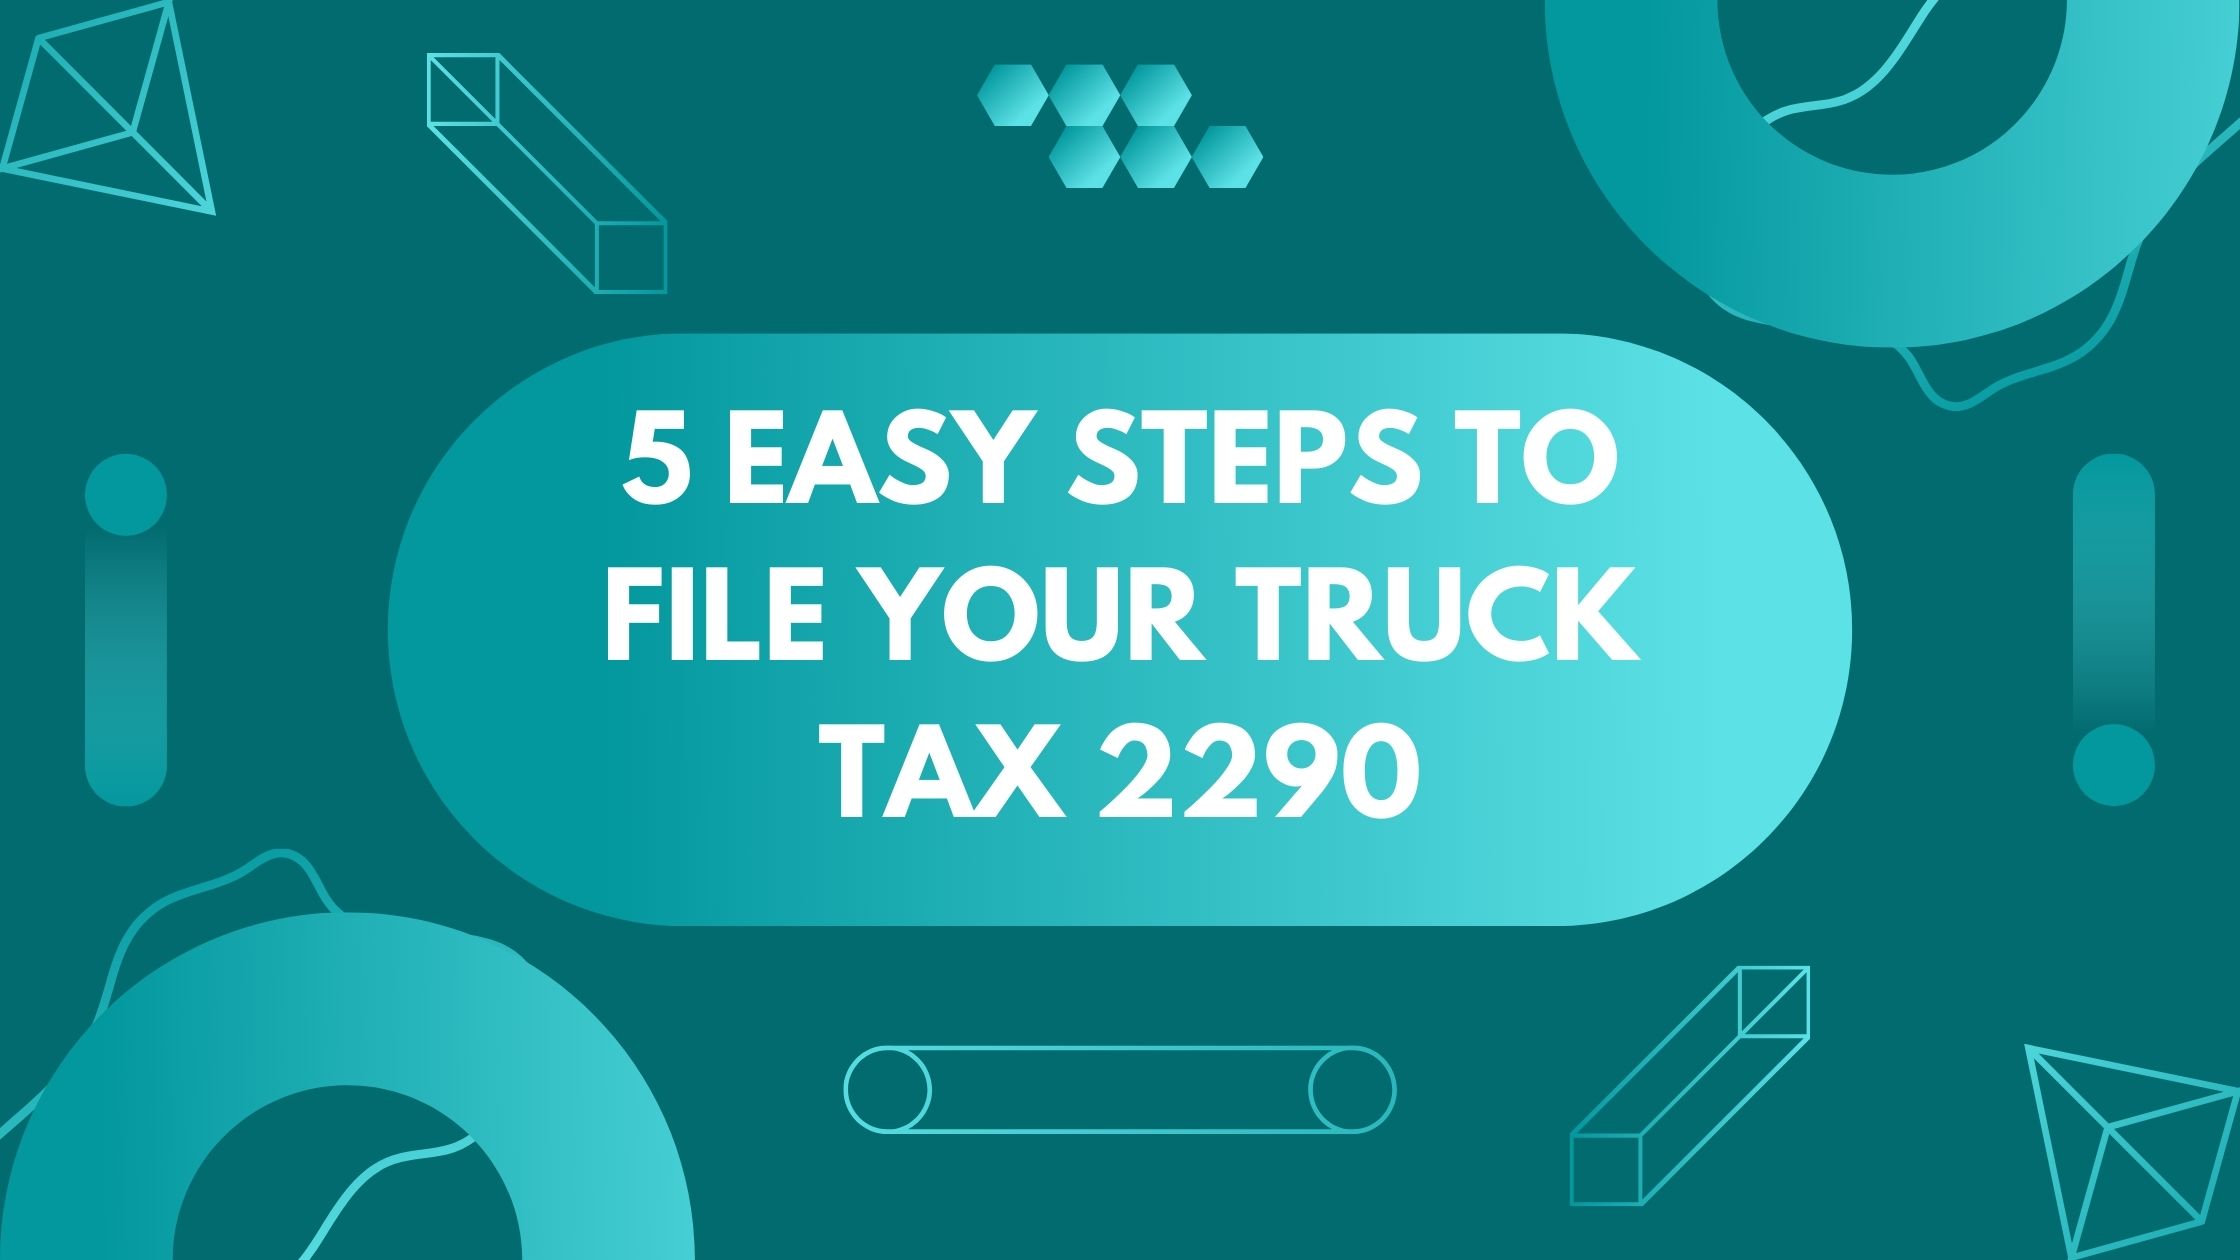 5 EASY STEPS TO FILE YOUR TRUCK TAX 2290